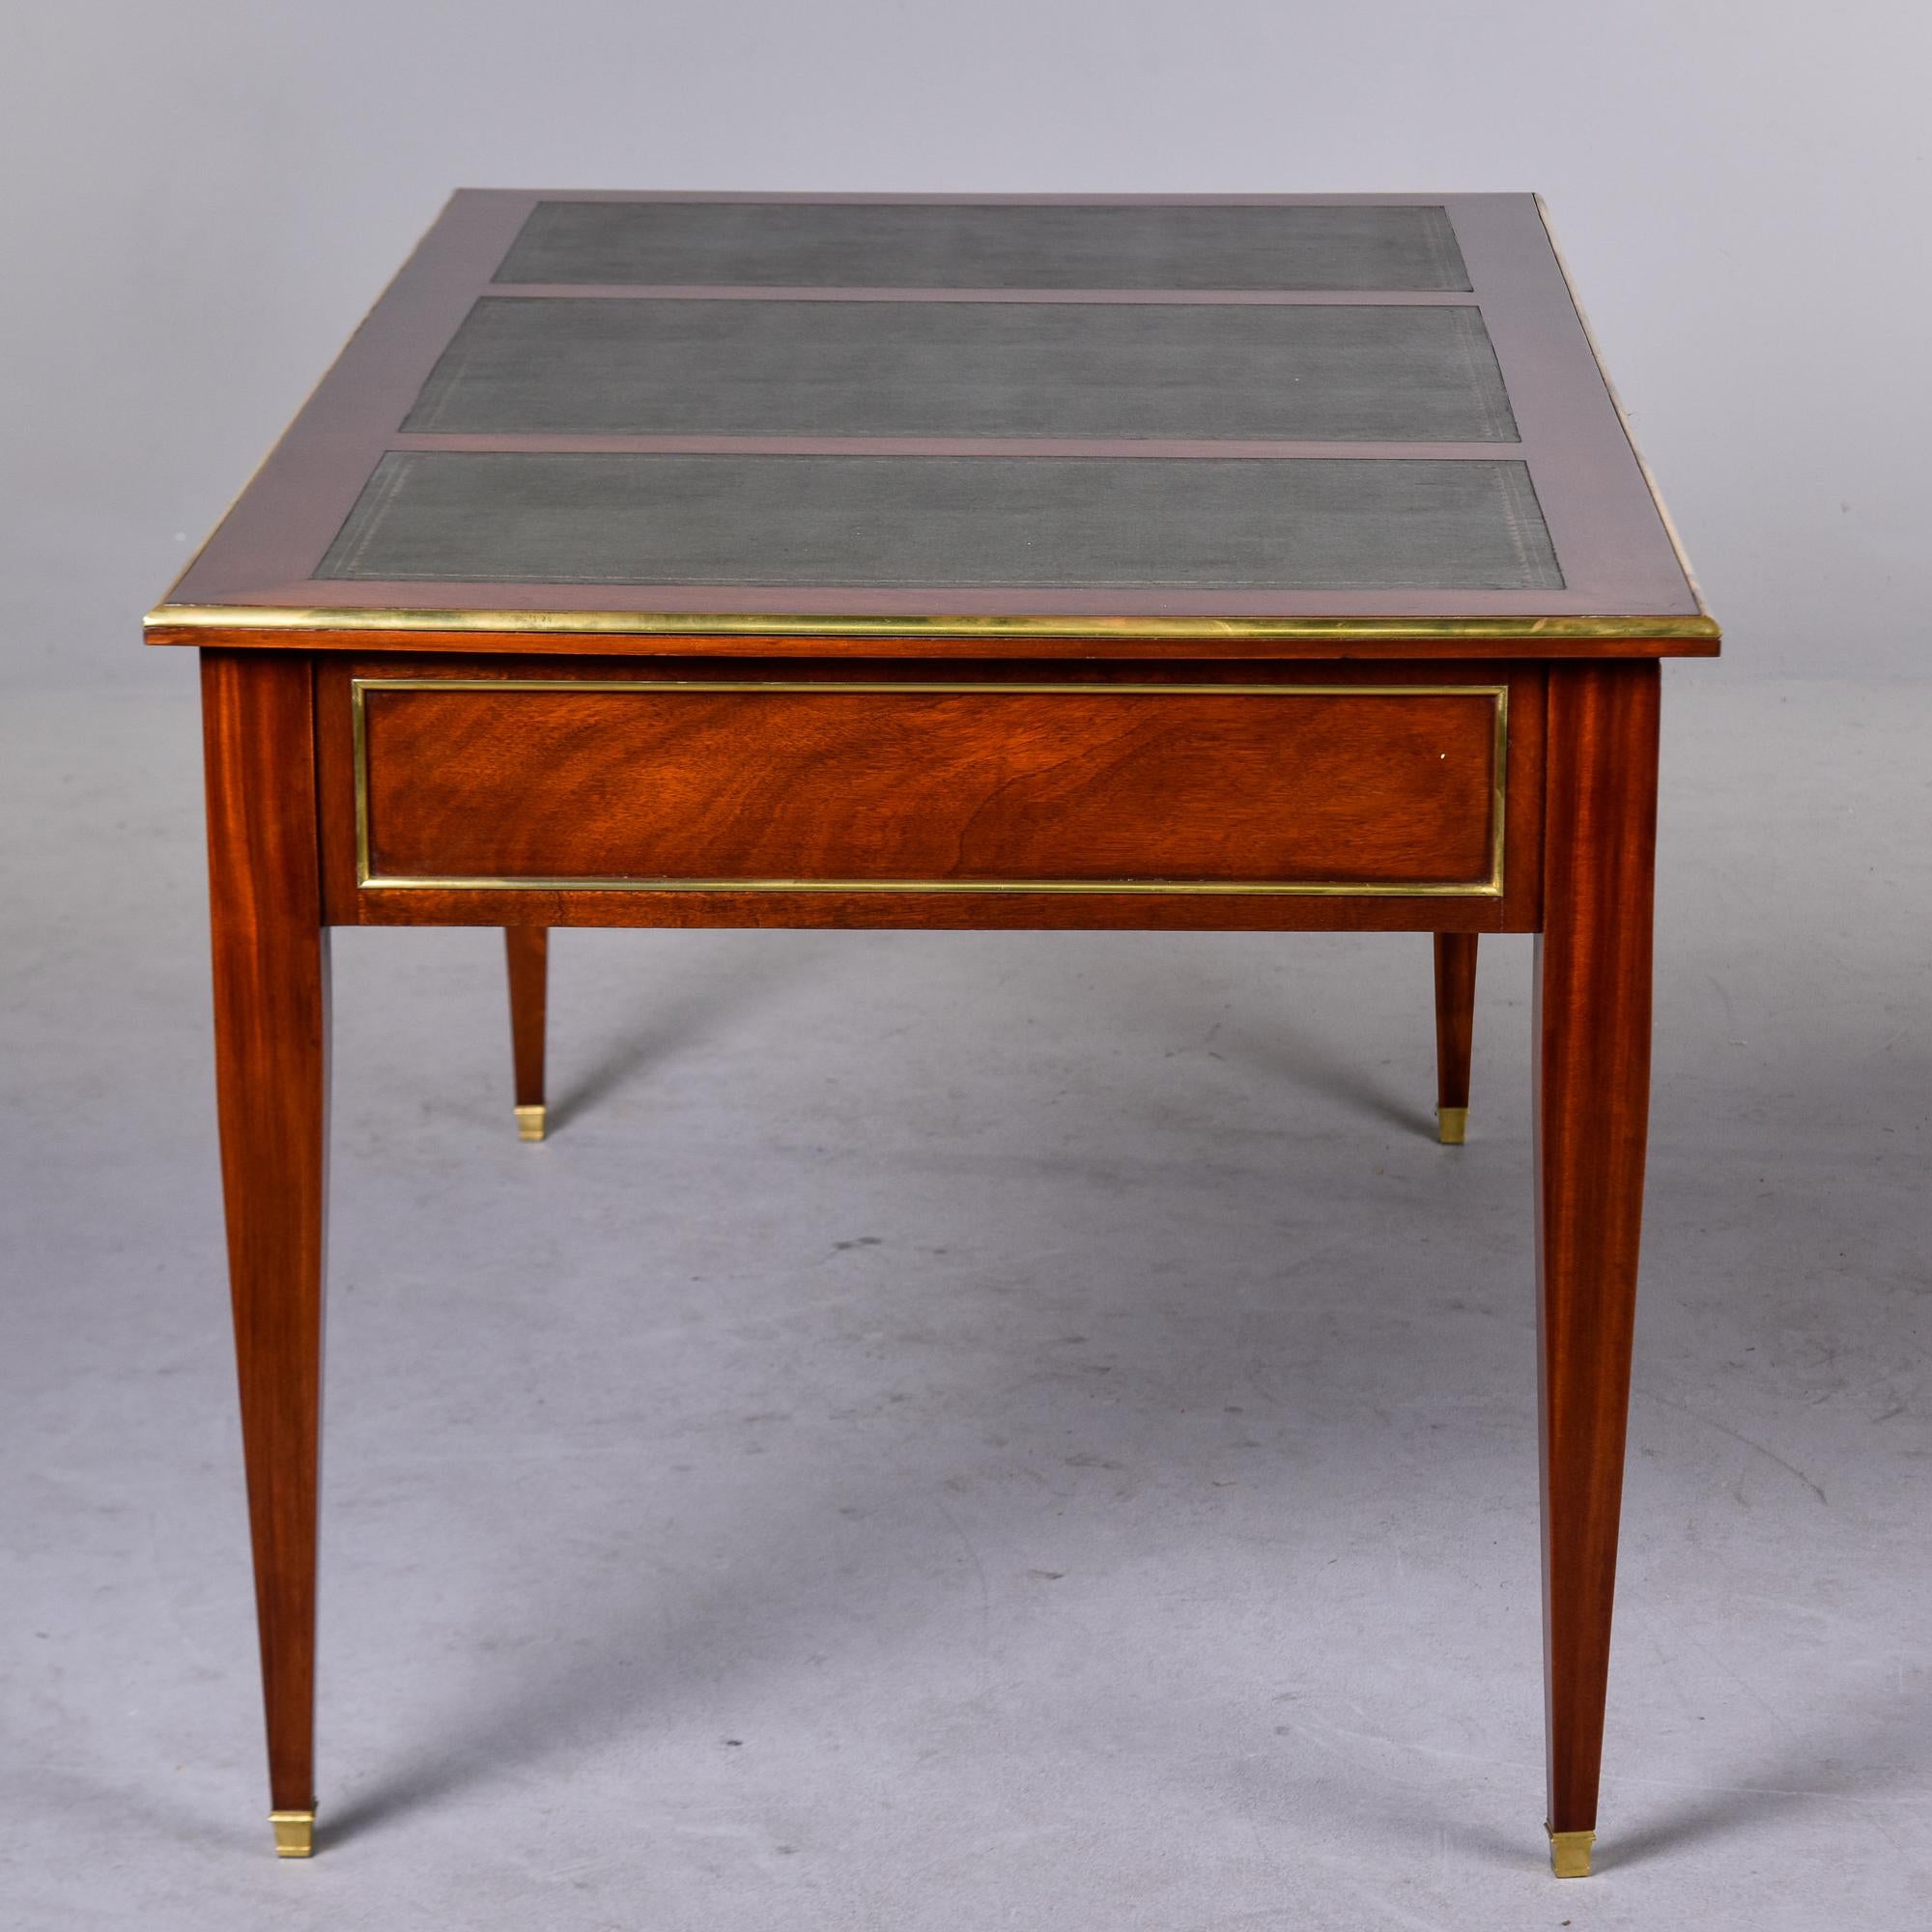 Early 19th Century Louis XVI Style Large Mahogany Desk with Green Leather Top For Sale 7